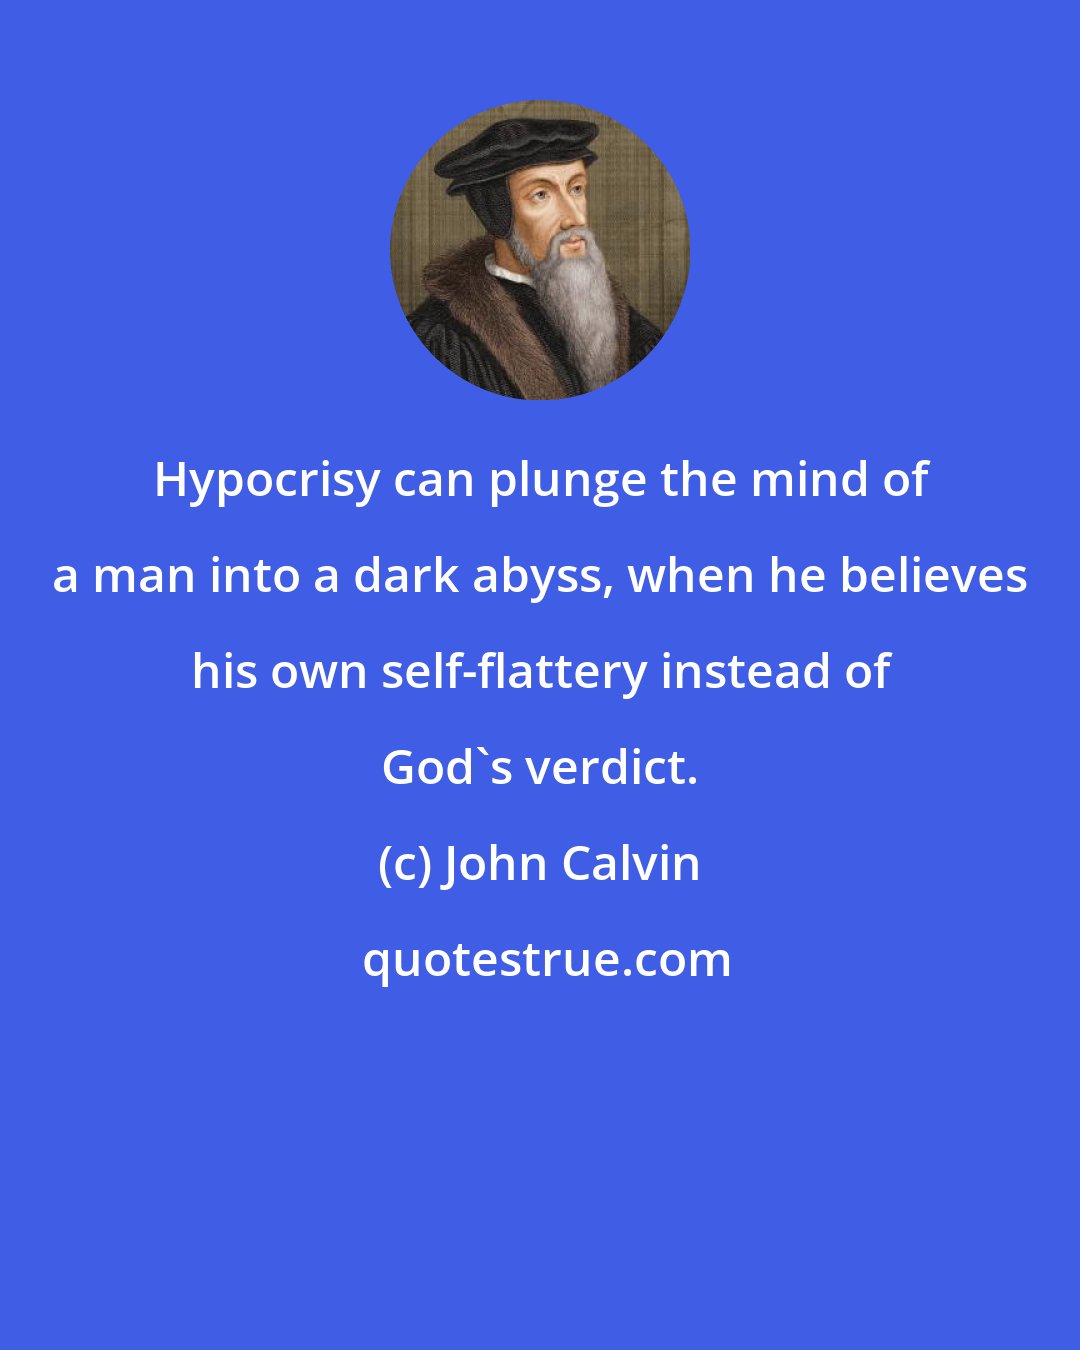 John Calvin: Hypocrisy can plunge the mind of a man into a dark abyss, when he believes his own self-flattery instead of God's verdict.